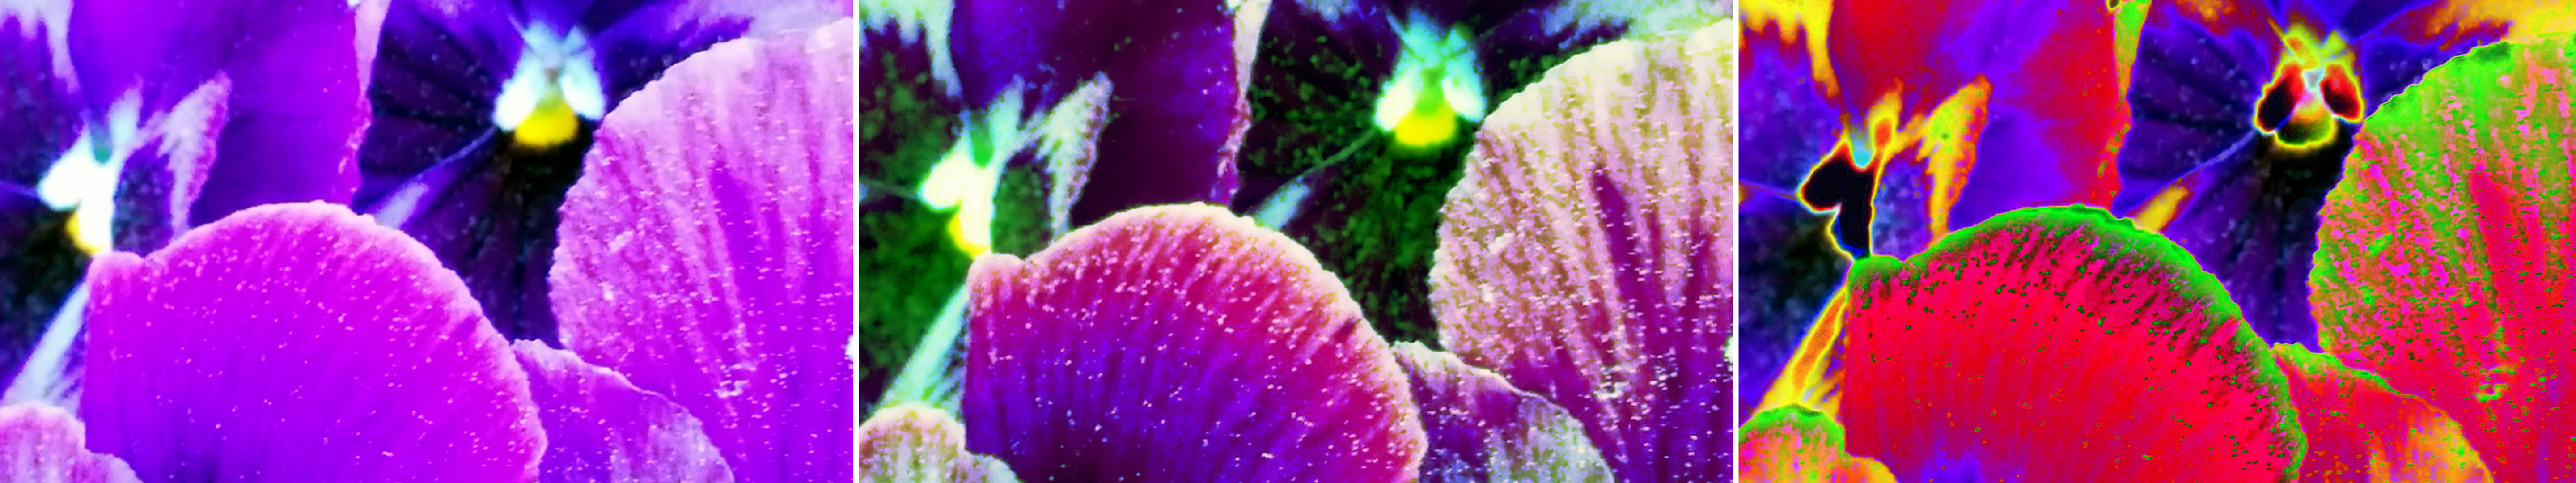 Macro of purple pansies in soft focus and its two treatments in a row. The combined image is meant to be an abstract representation of the progression of desire from the initial spark to a hot burn, hence the name. The lighter colored outer parts of the petals are in the foregound. In the background are centers of two pansies, each center surrounded by darker colored inner parts of petals.